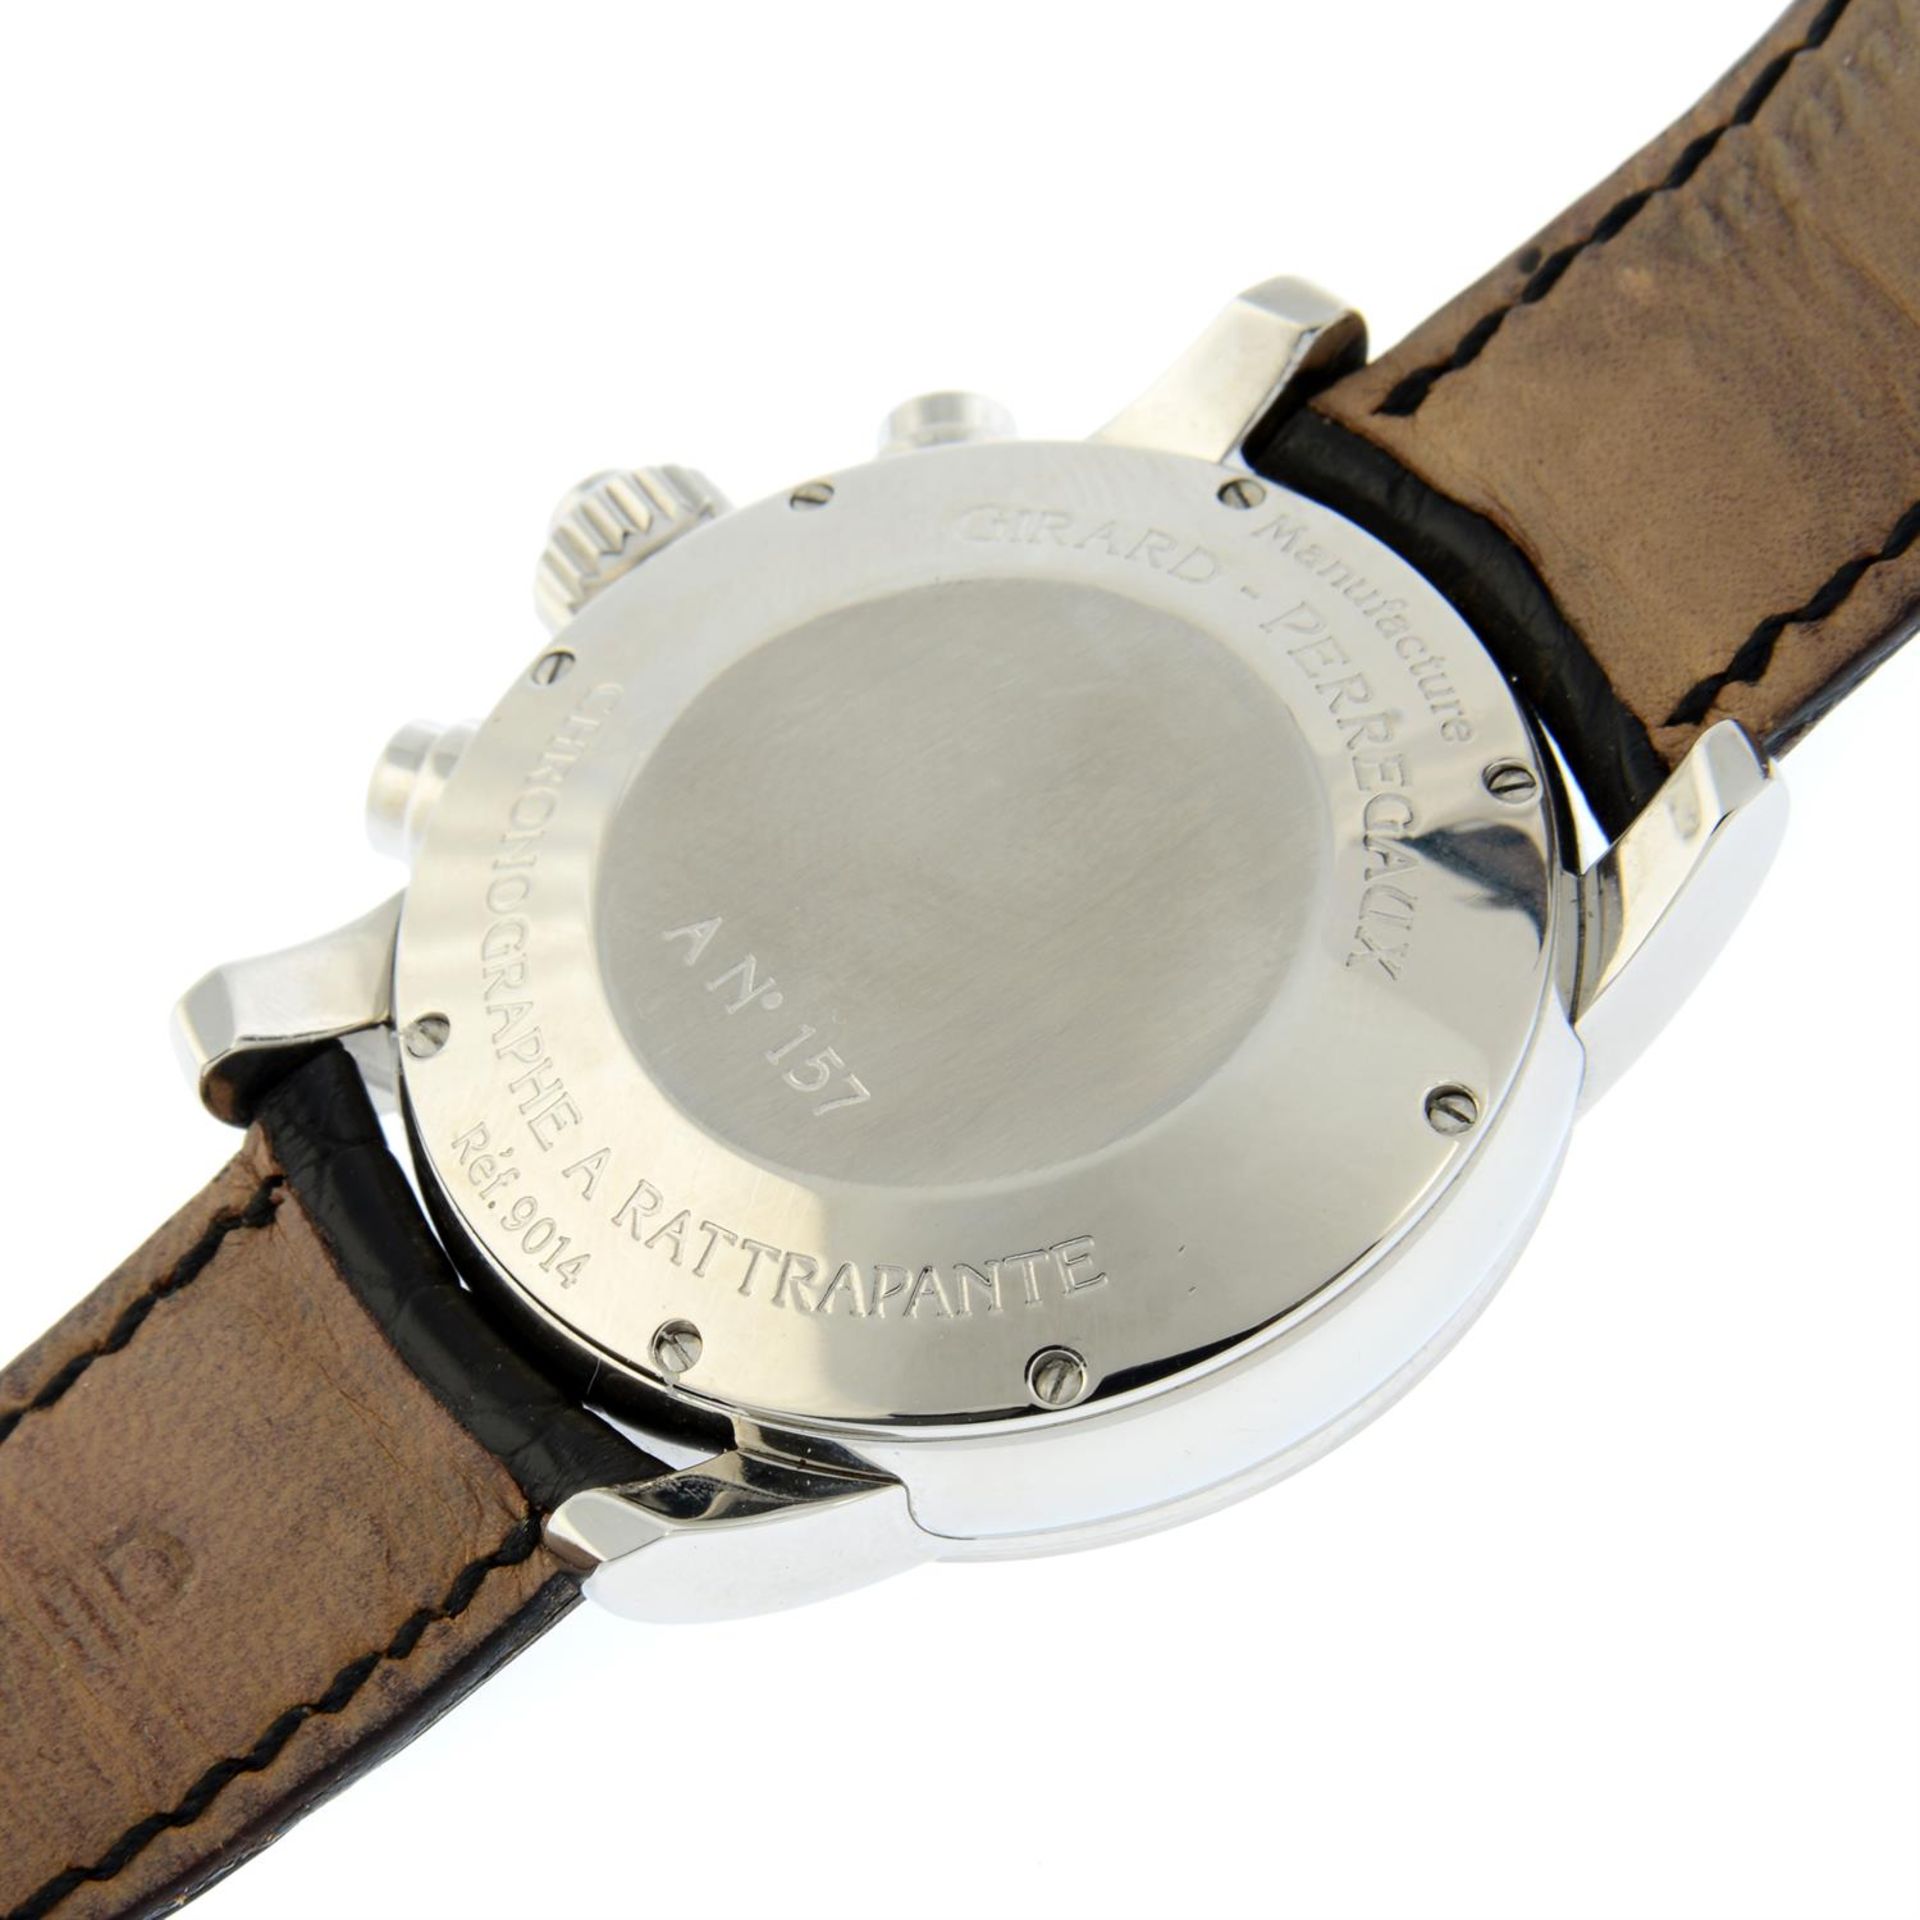 GIRARD-PERREGAUX - a stainless steel Chronographe à Rattrapante wrist watch, 38mm. - Image 4 of 6